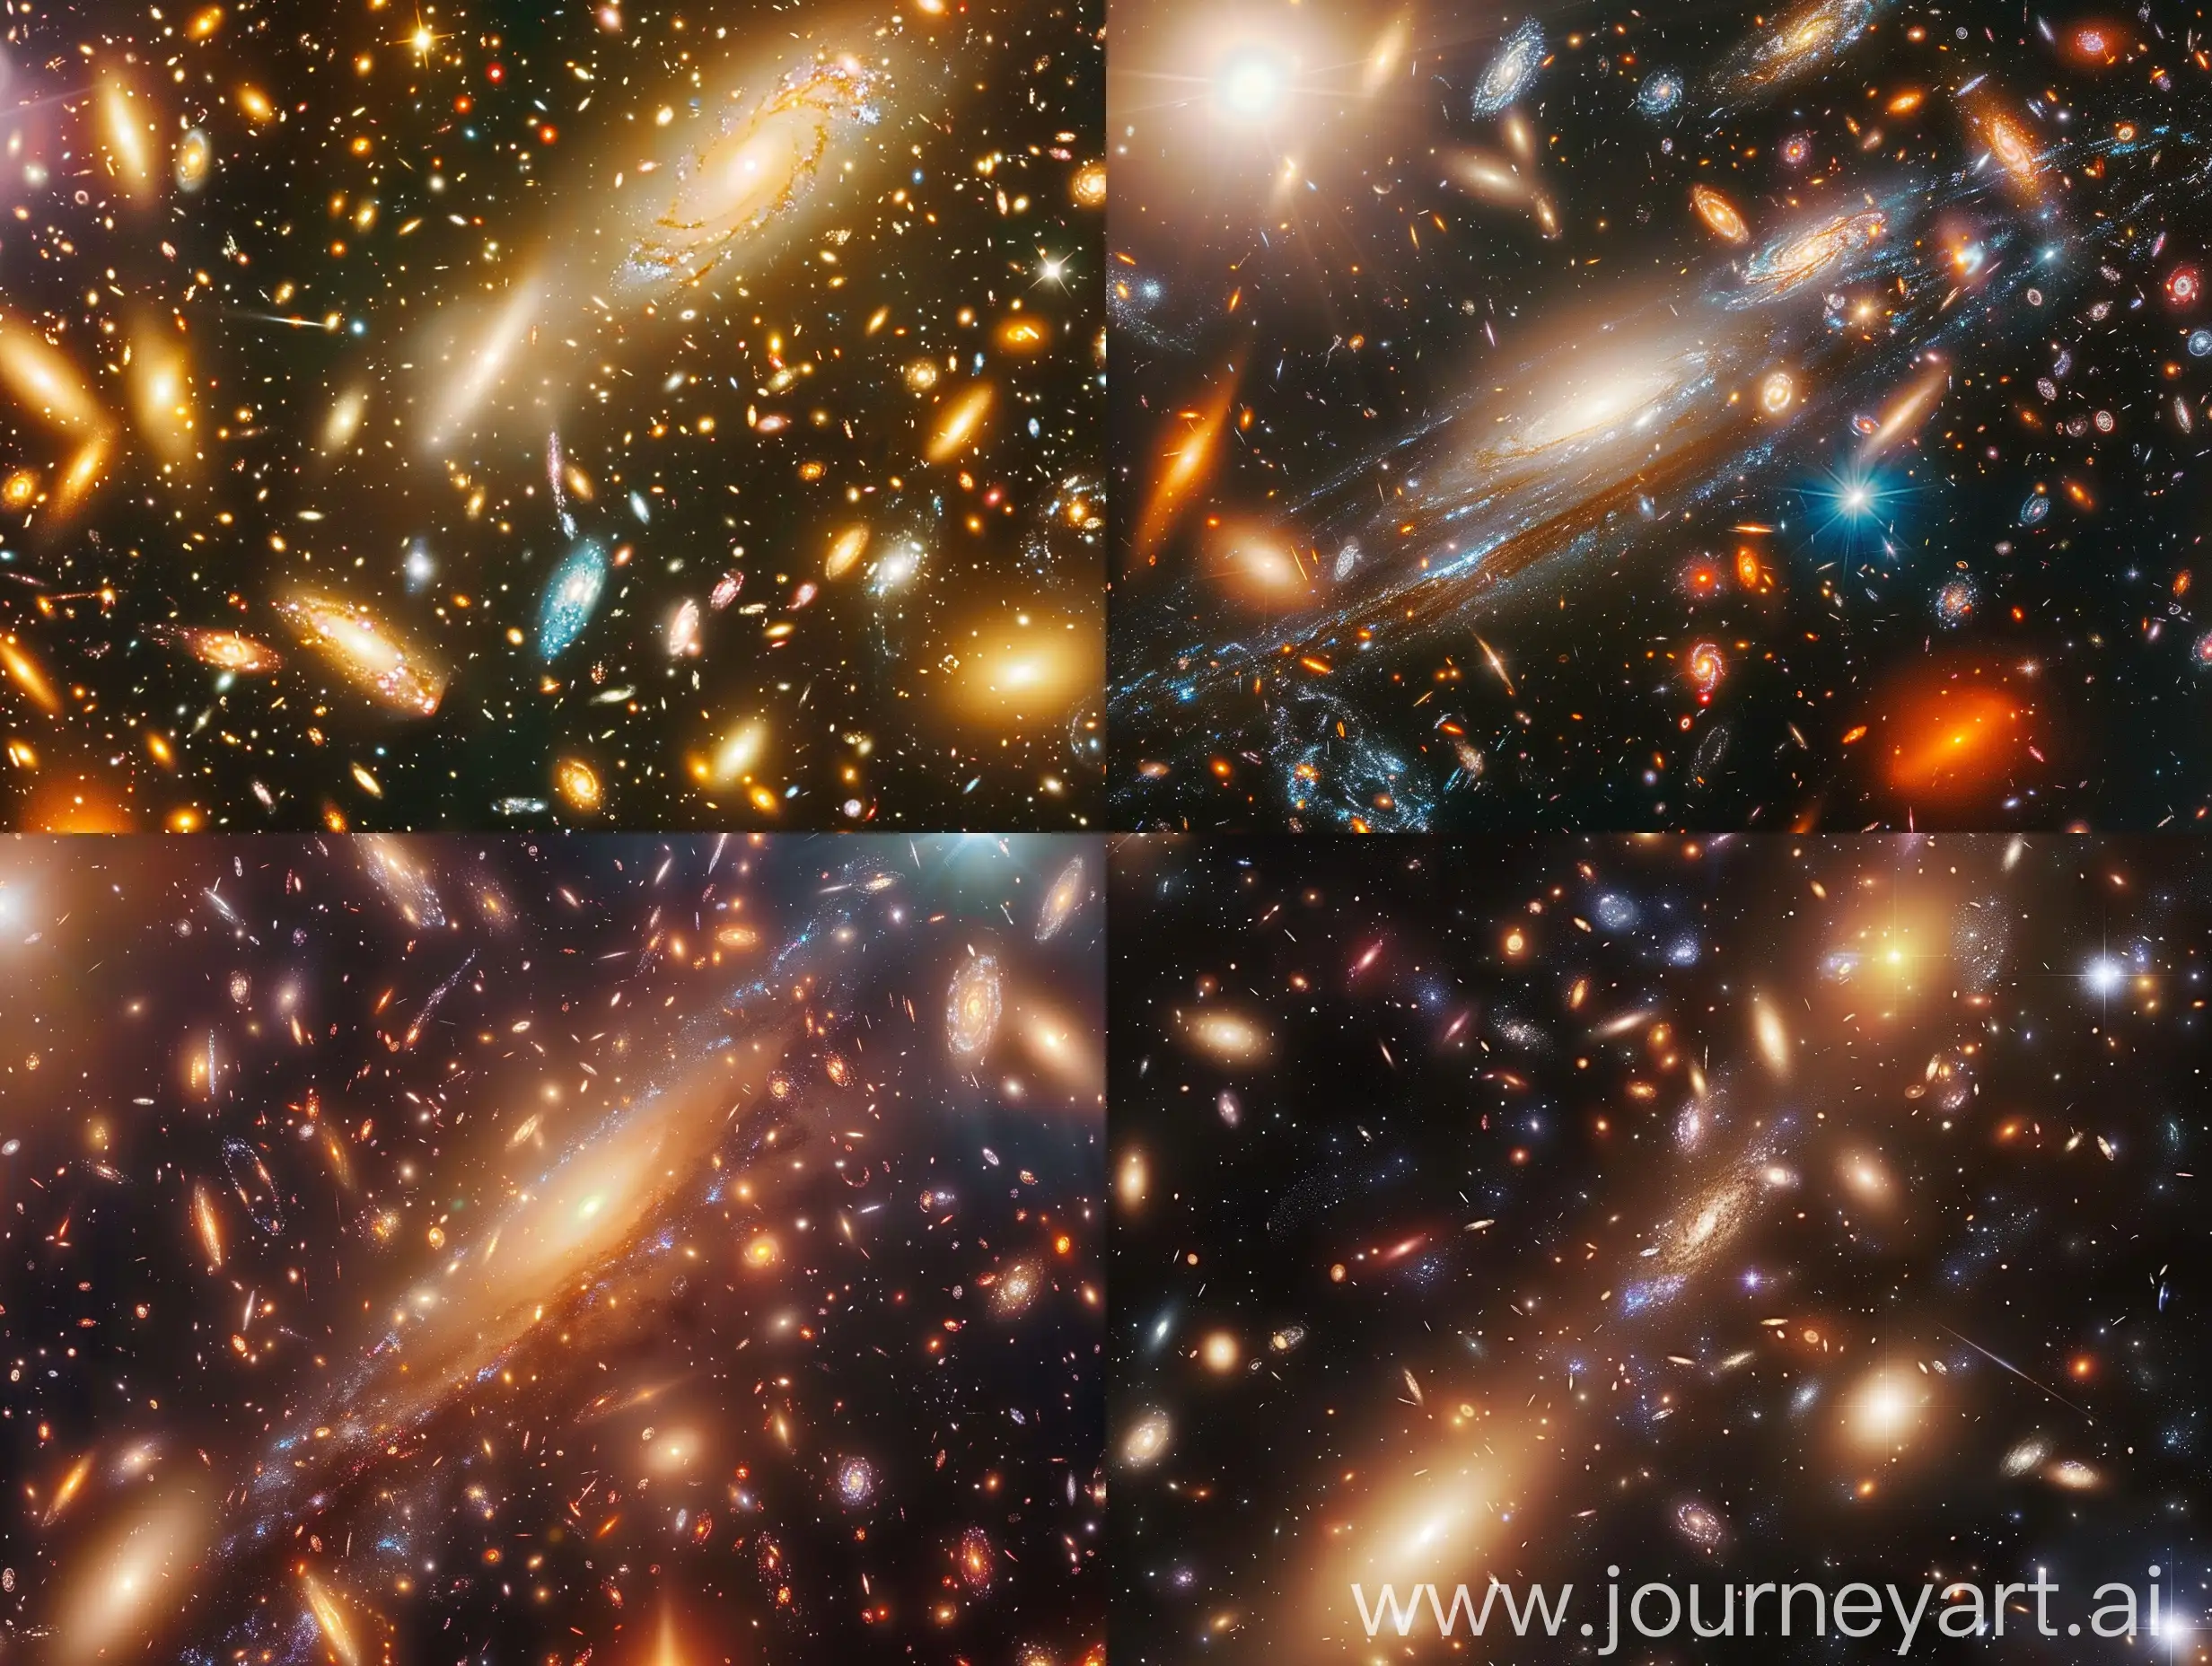 Galactic-Void-Amidst-a-Sea-of-Glittering-Galaxies